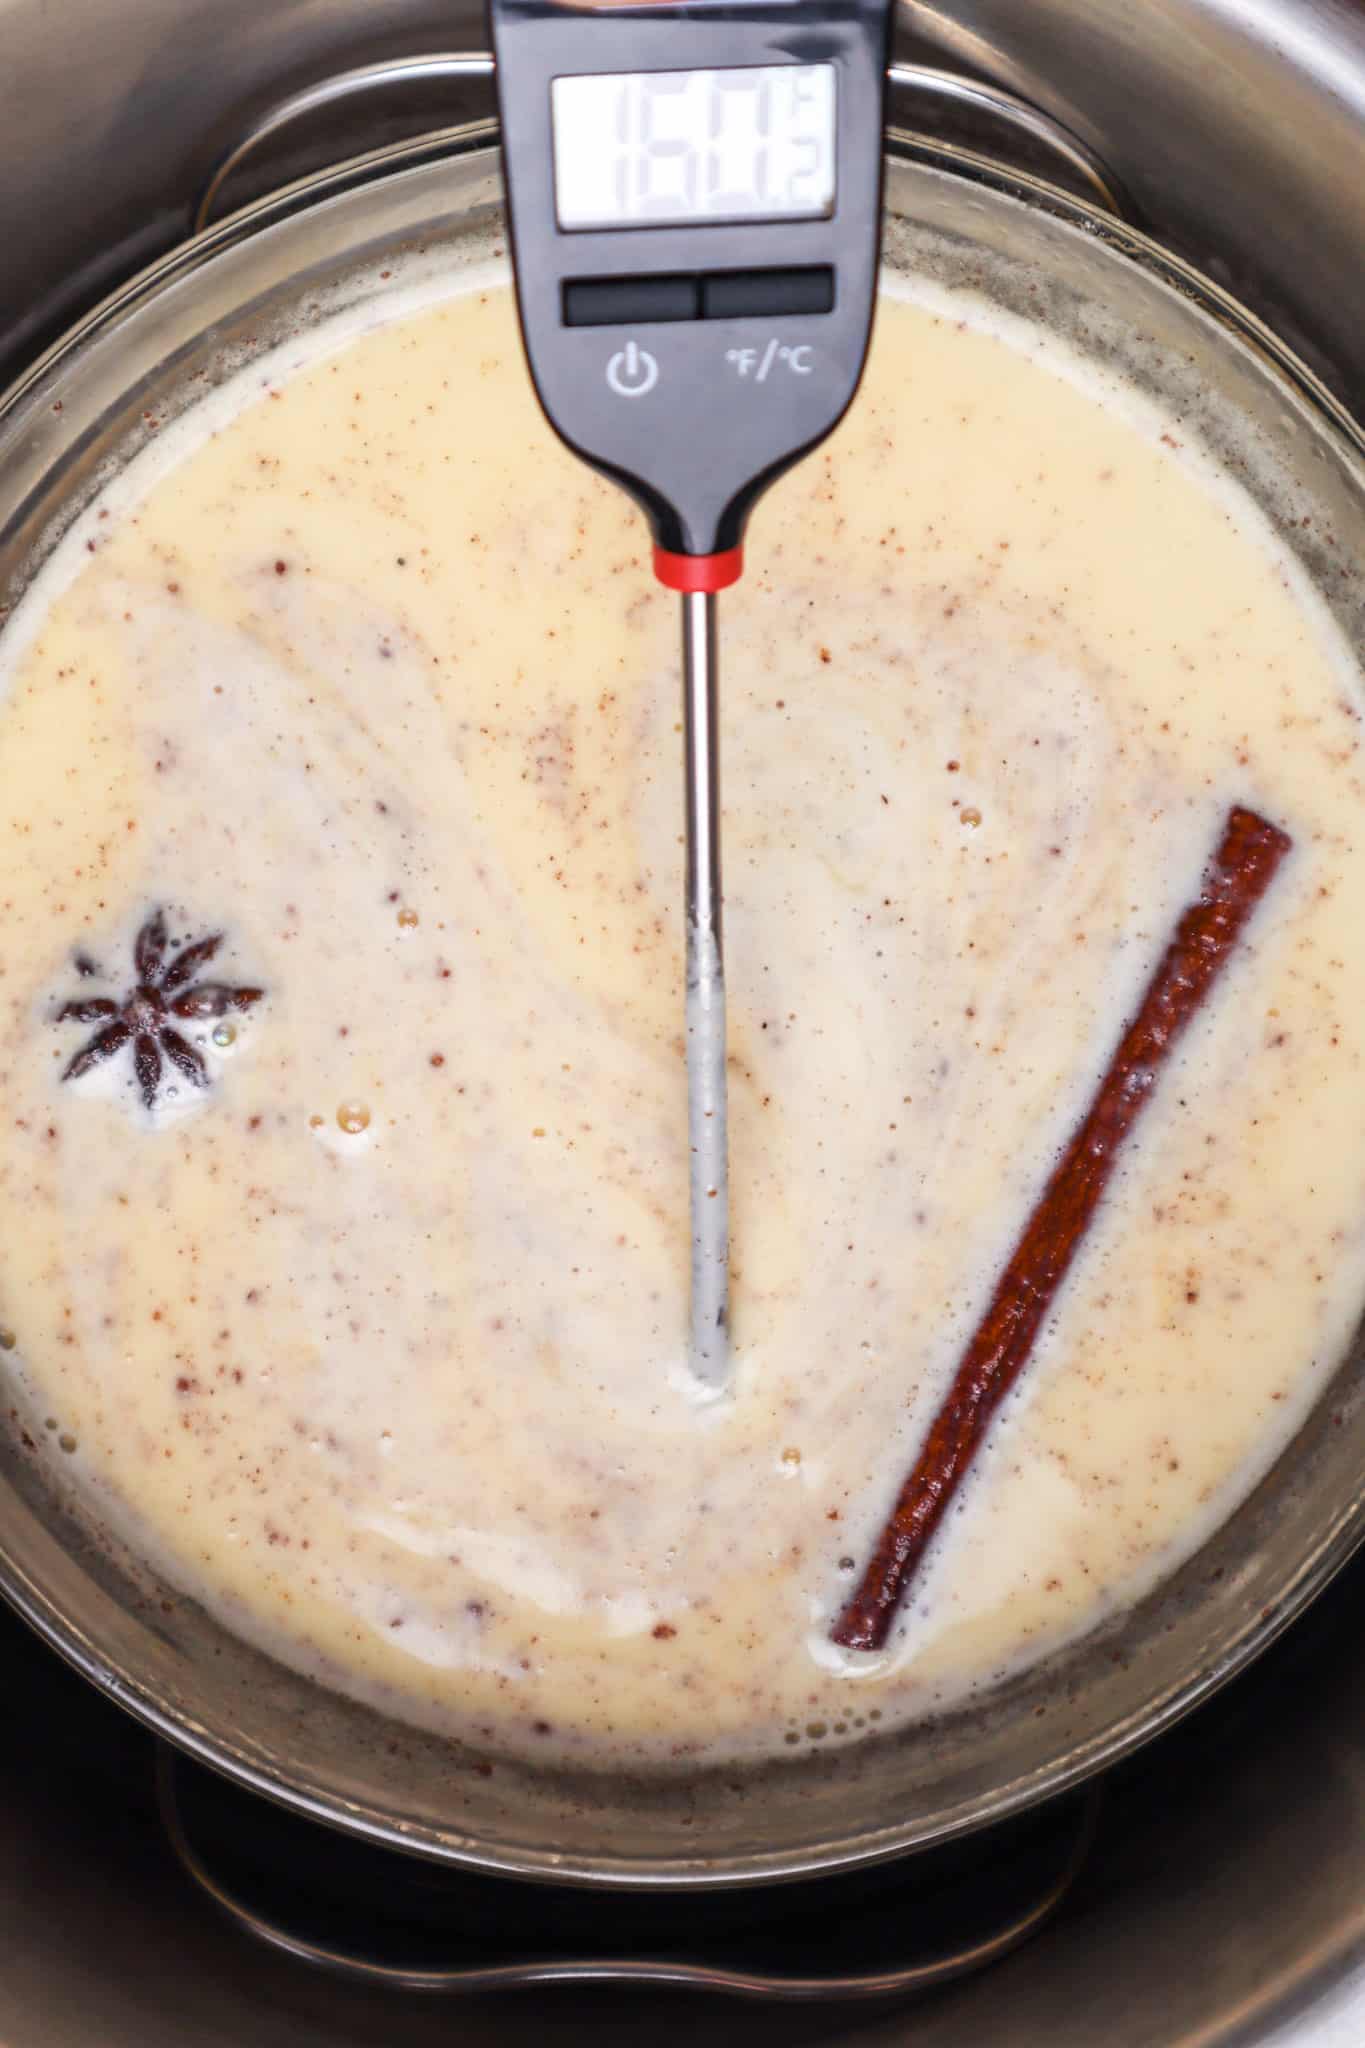 food thermometer showing 160f degree temperature reading while inserted to mixture.